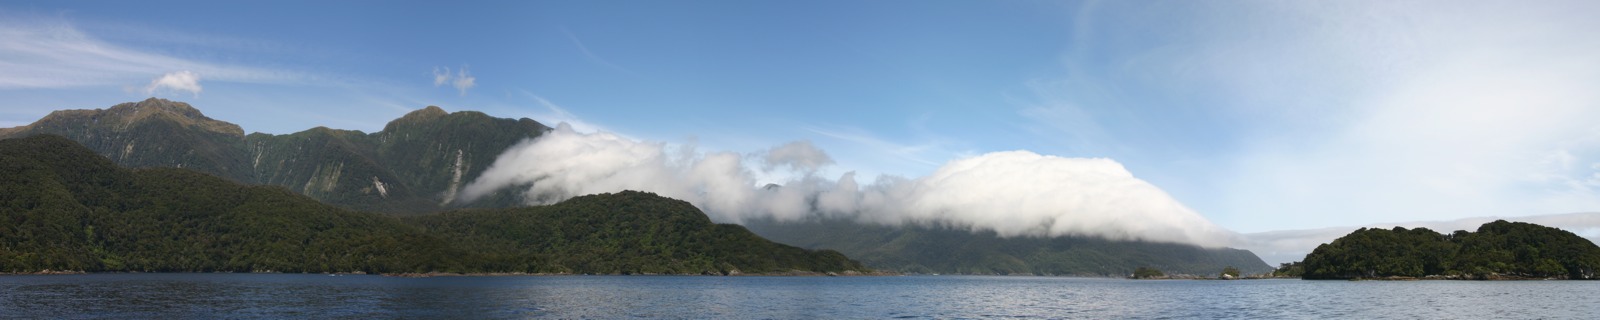 Cloud-covered mountains at the end of Doubtful Sound panorama